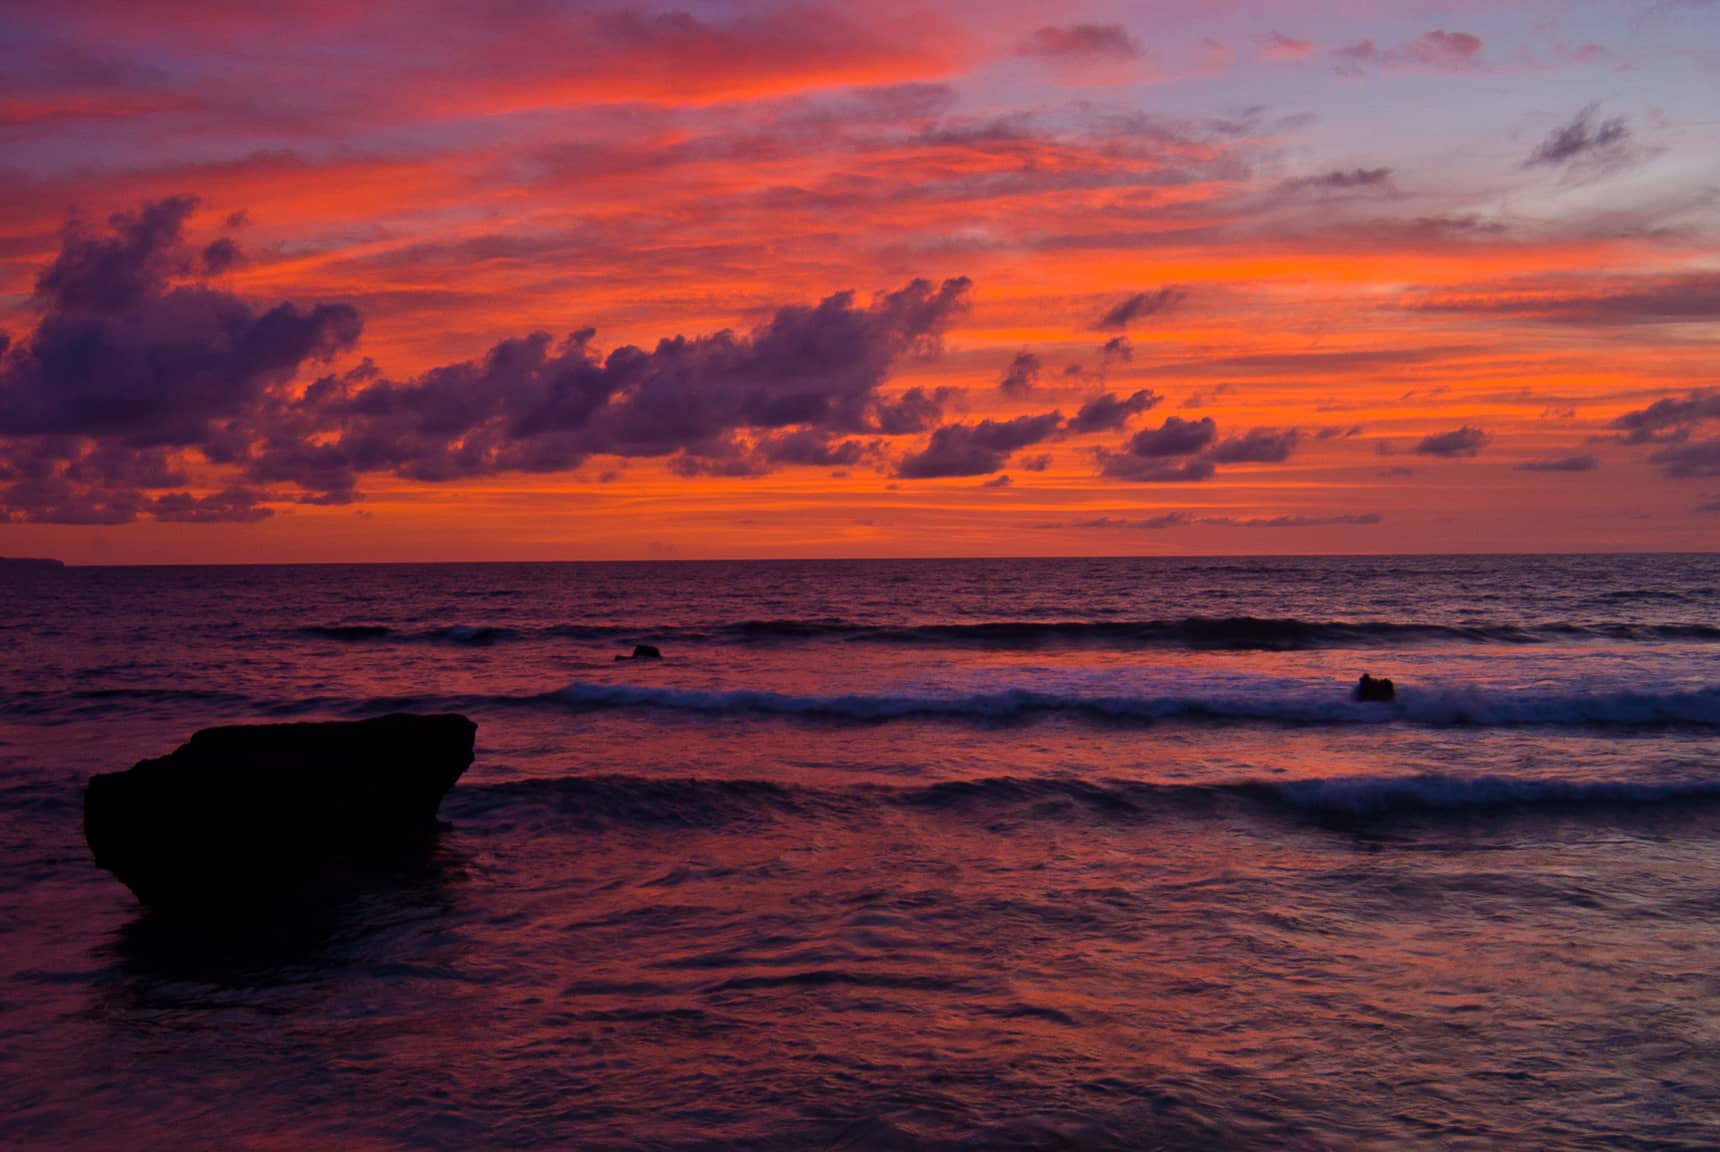 Professional photos of sunsets in Bali Indonesia - Echo Beach